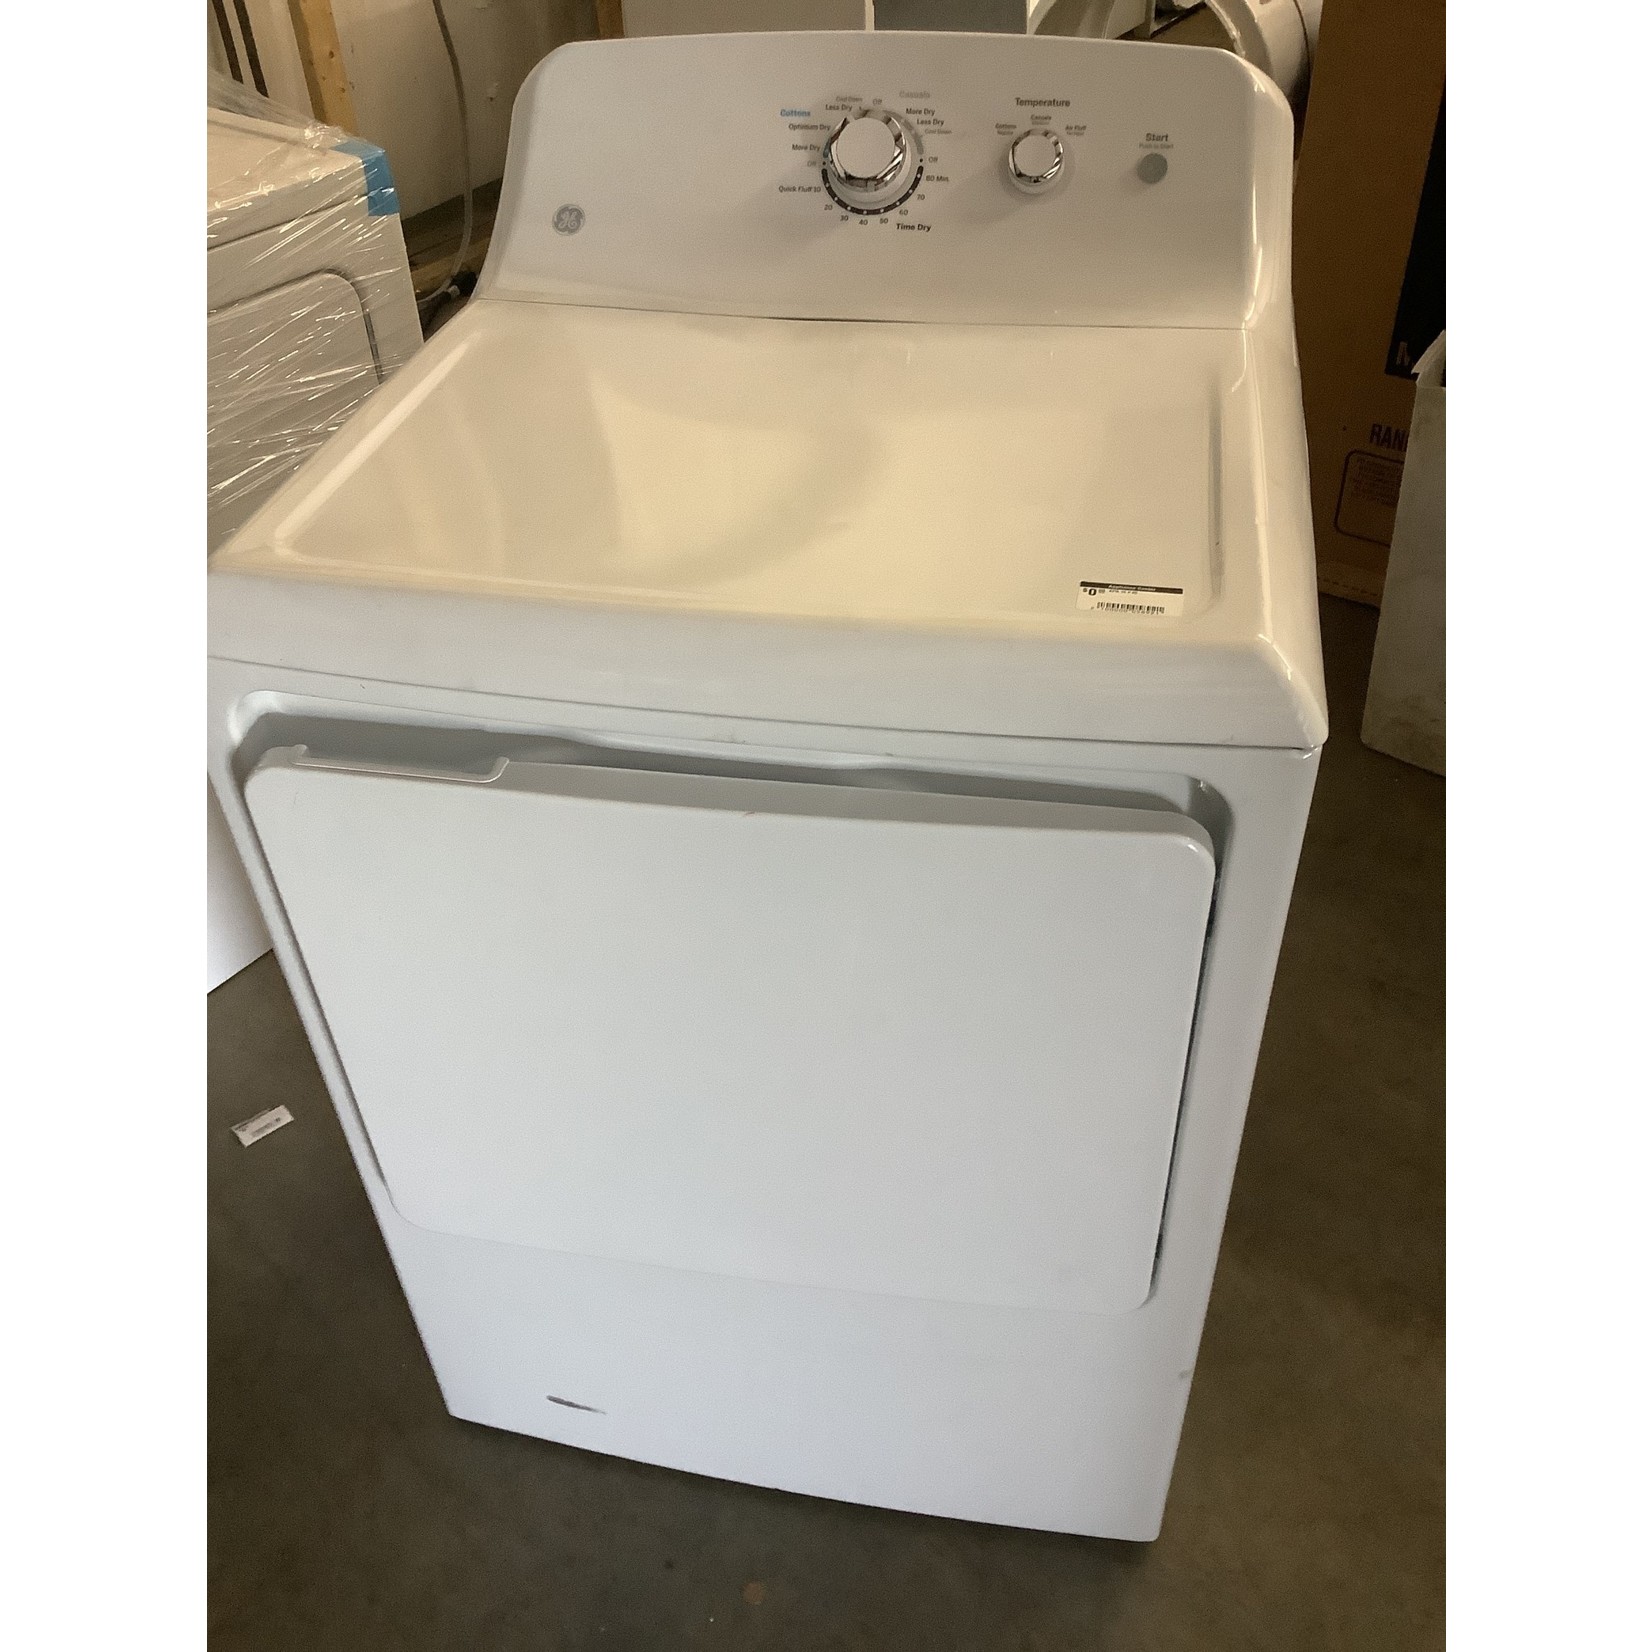 General Electric WASHER